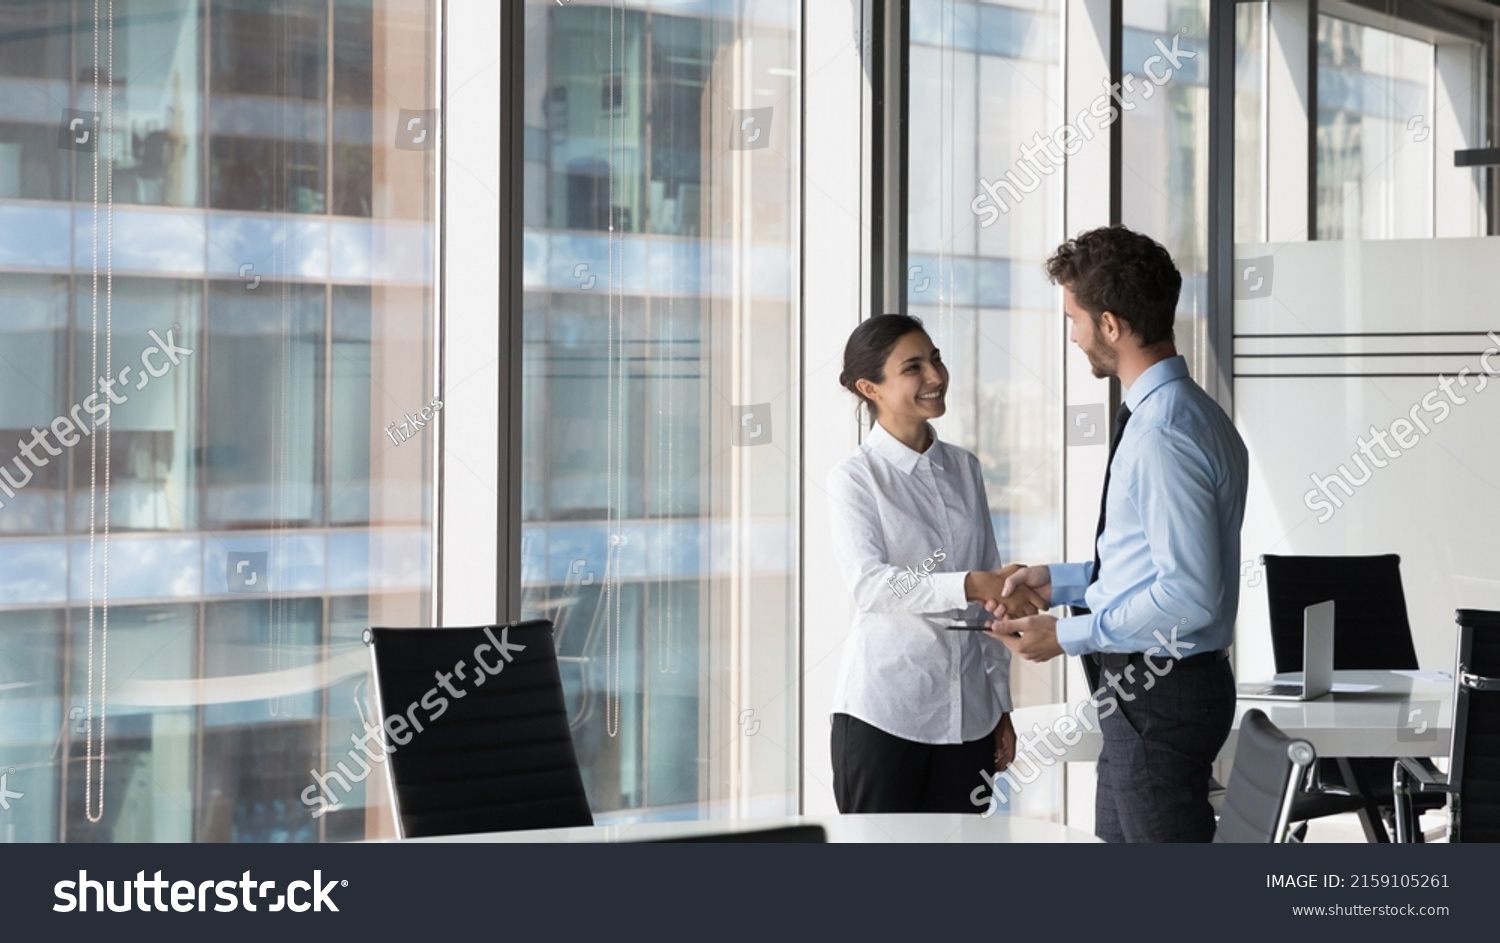 Indian woman shake hand company boss hr manager after successful job interview, client and manager handshake make deal feel satisfied. Multiracial workmates meet in office talk express respect concept #2159105261